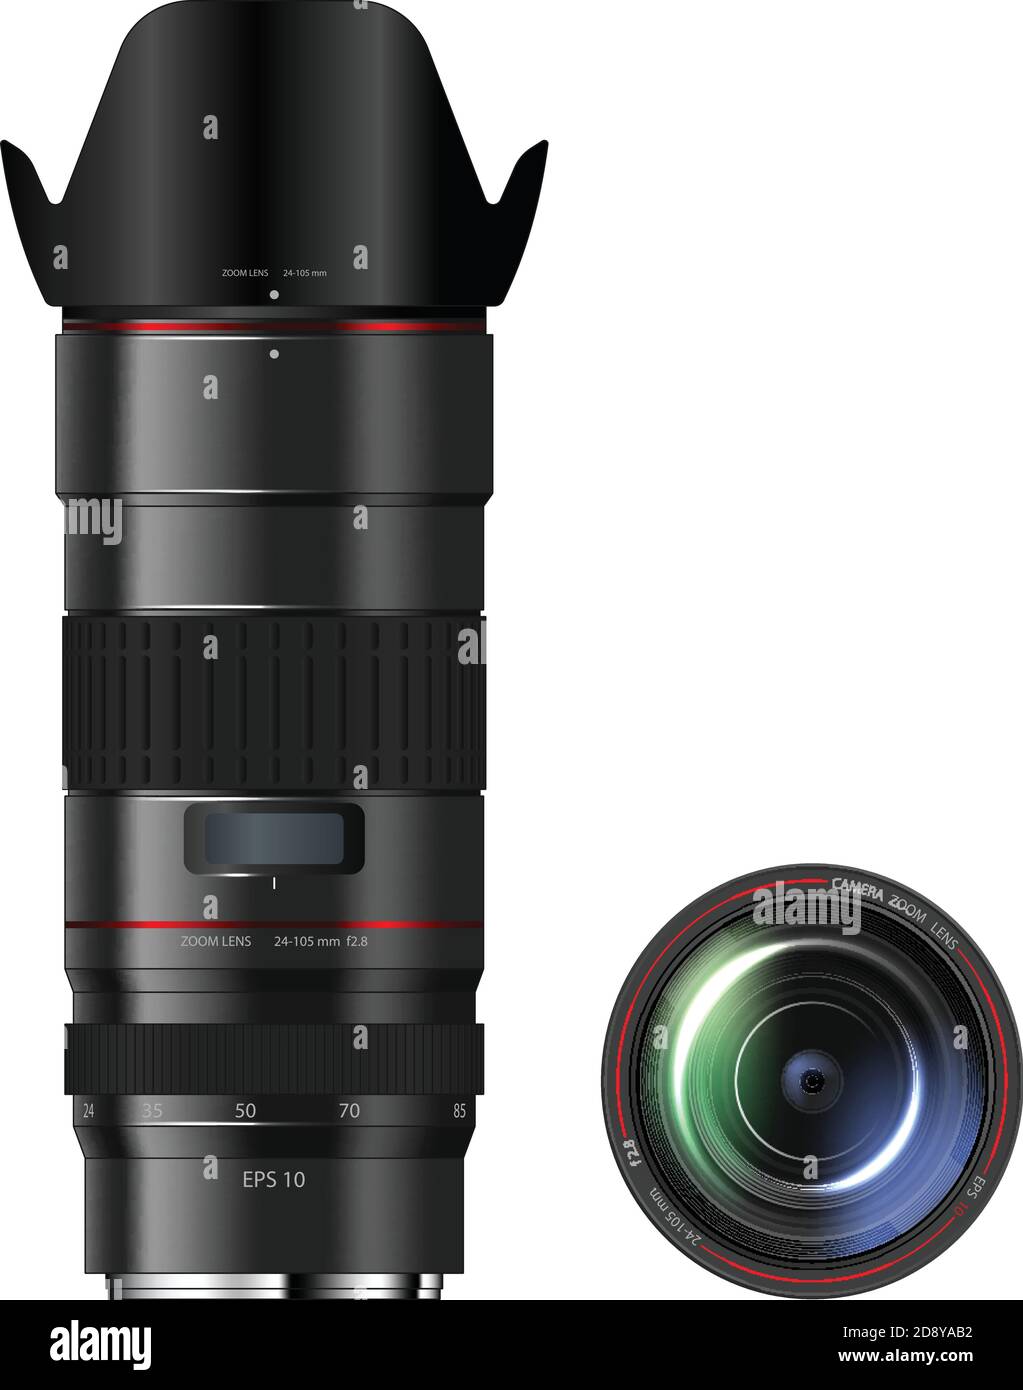 Zoom Lens Illustration High Resolution Stock Photography and Images - Alamy